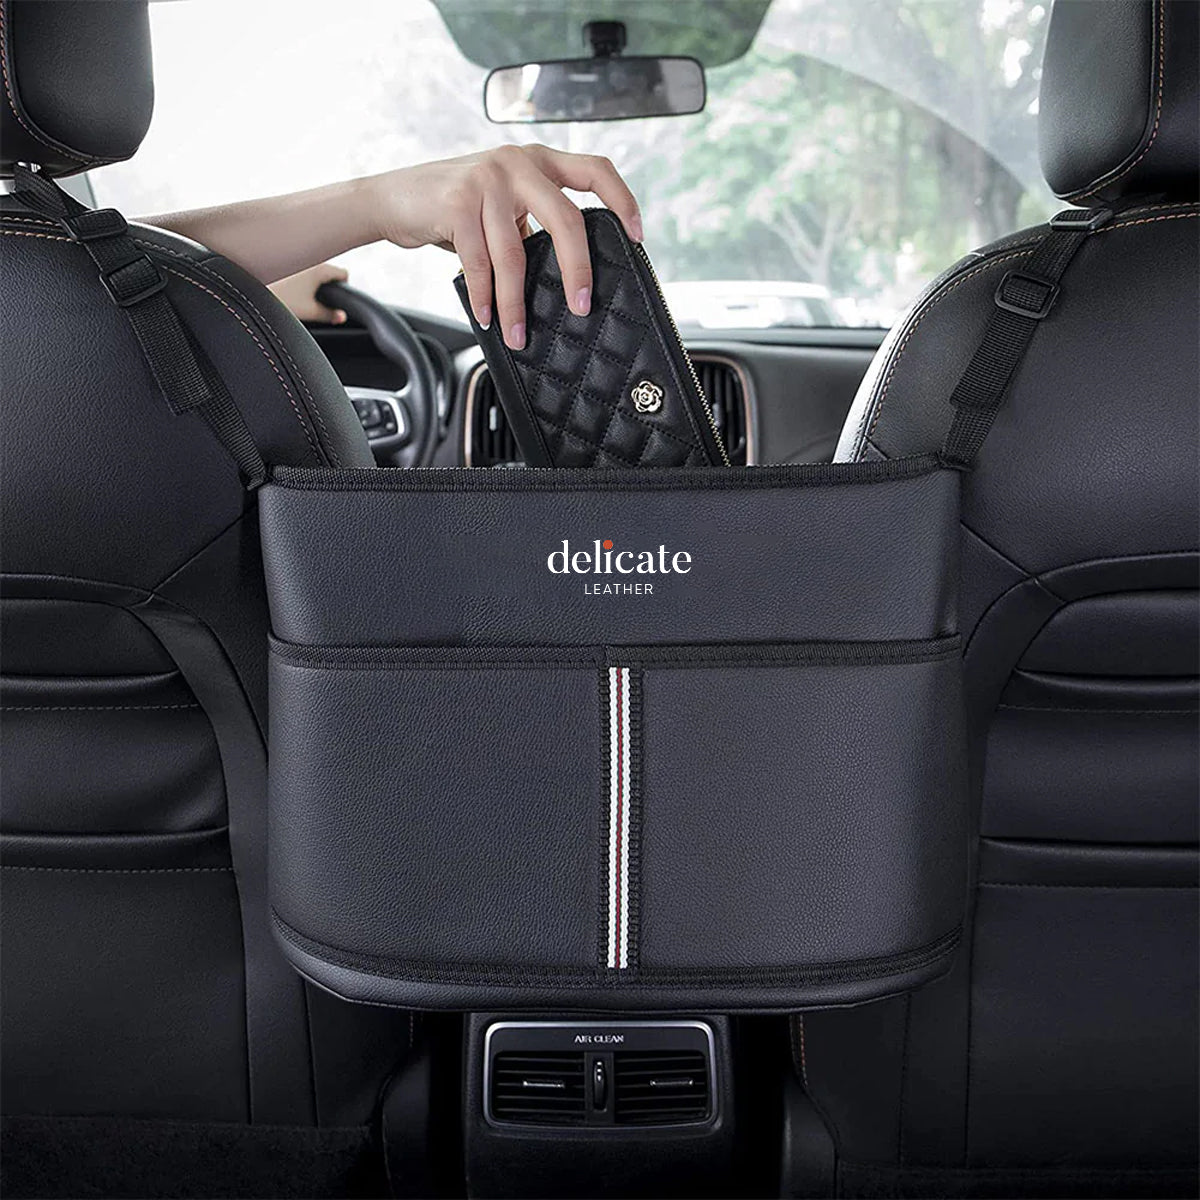 Mitsubishi Car Purse Holder: Keep Your Bag Secure and Accessible on the Go